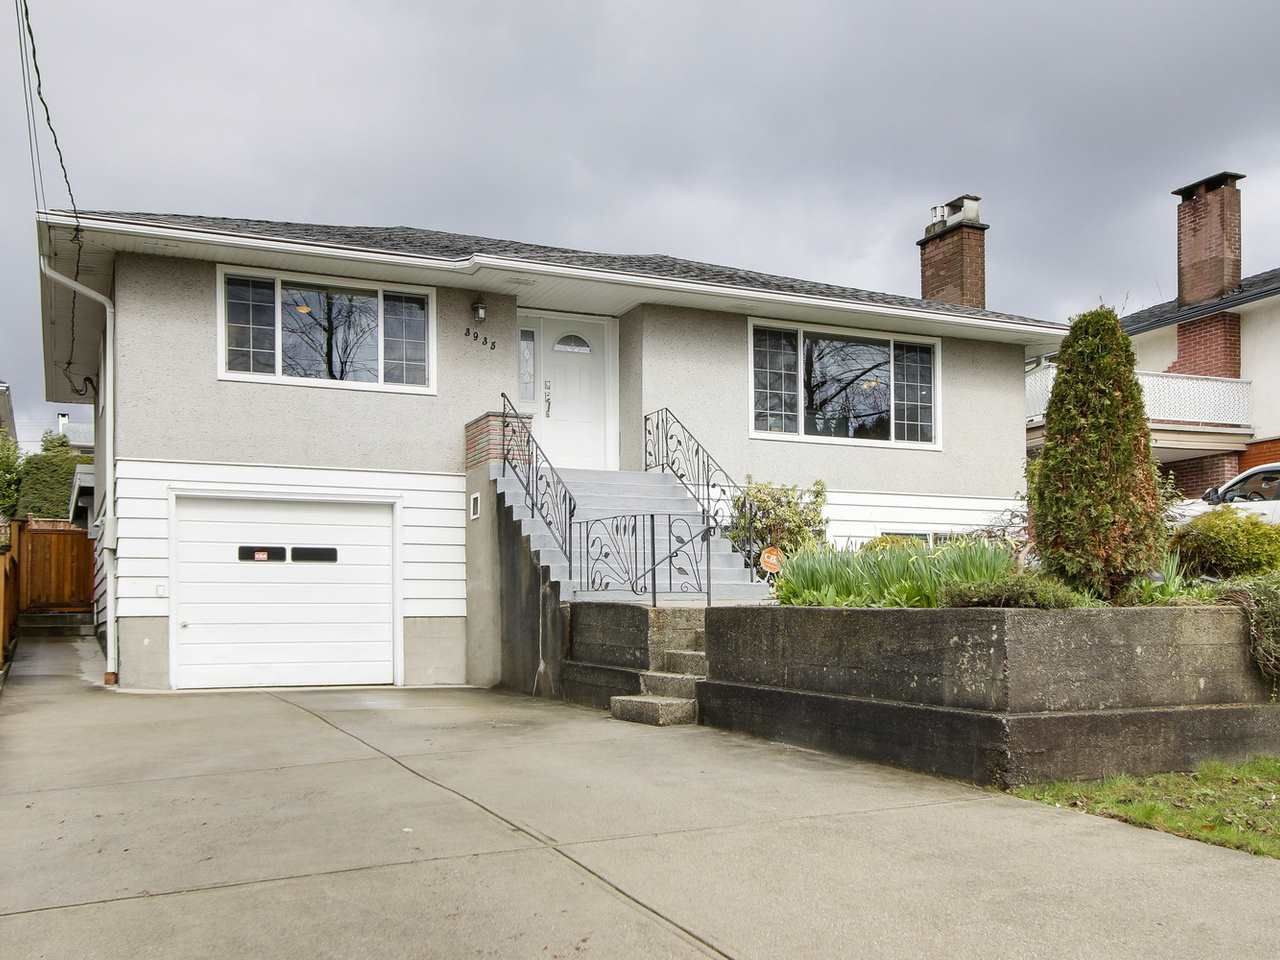 Main Photo: 3935 WILLIAM Street in Burnaby: Willingdon Heights House for sale (Burnaby North)  : MLS®# R2149718